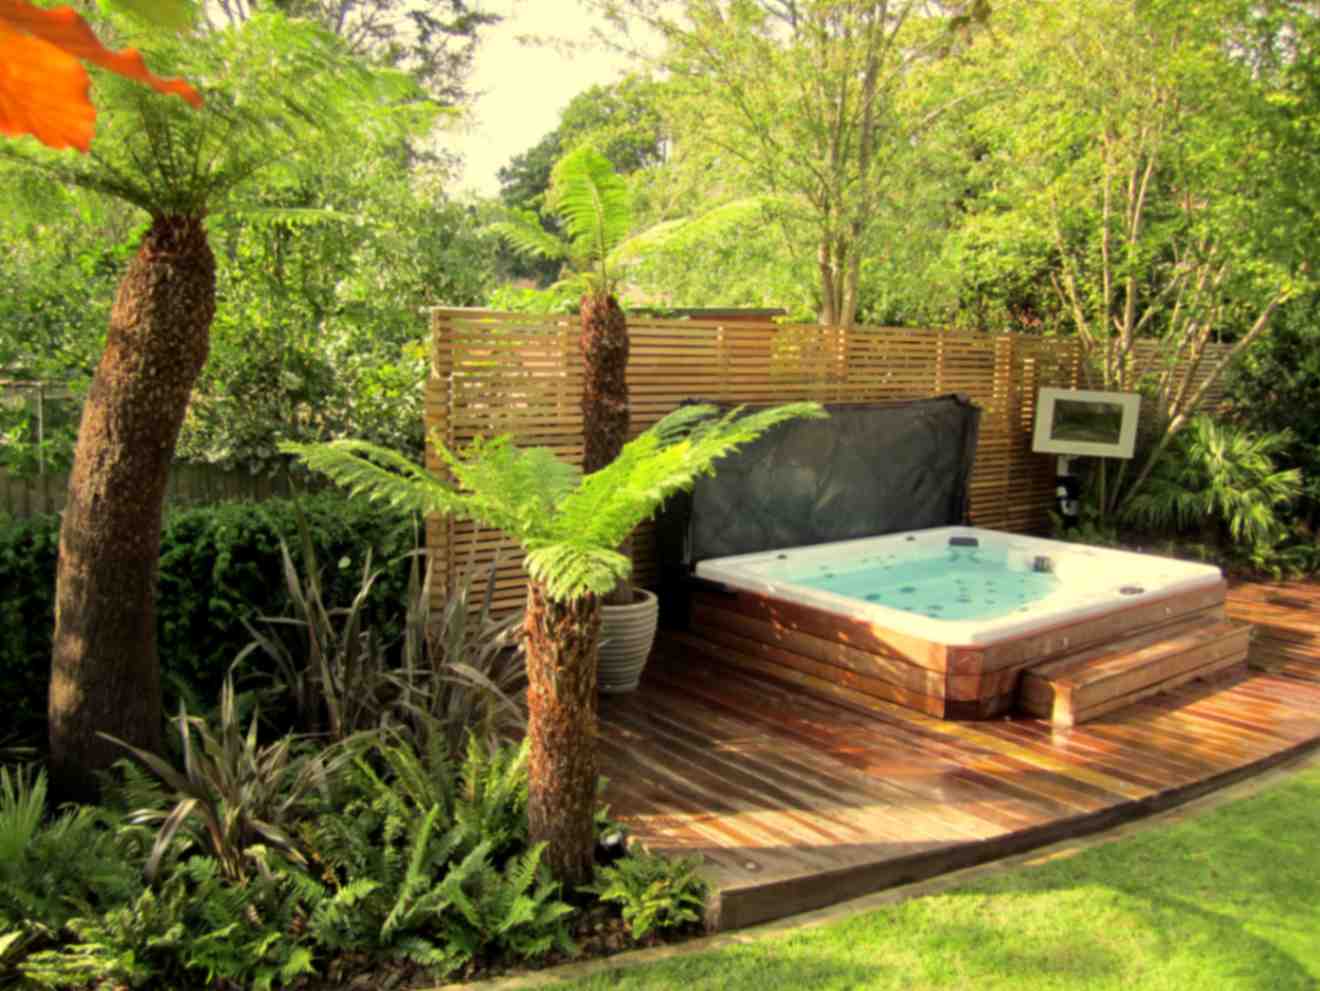 Decking & Tropical Planting